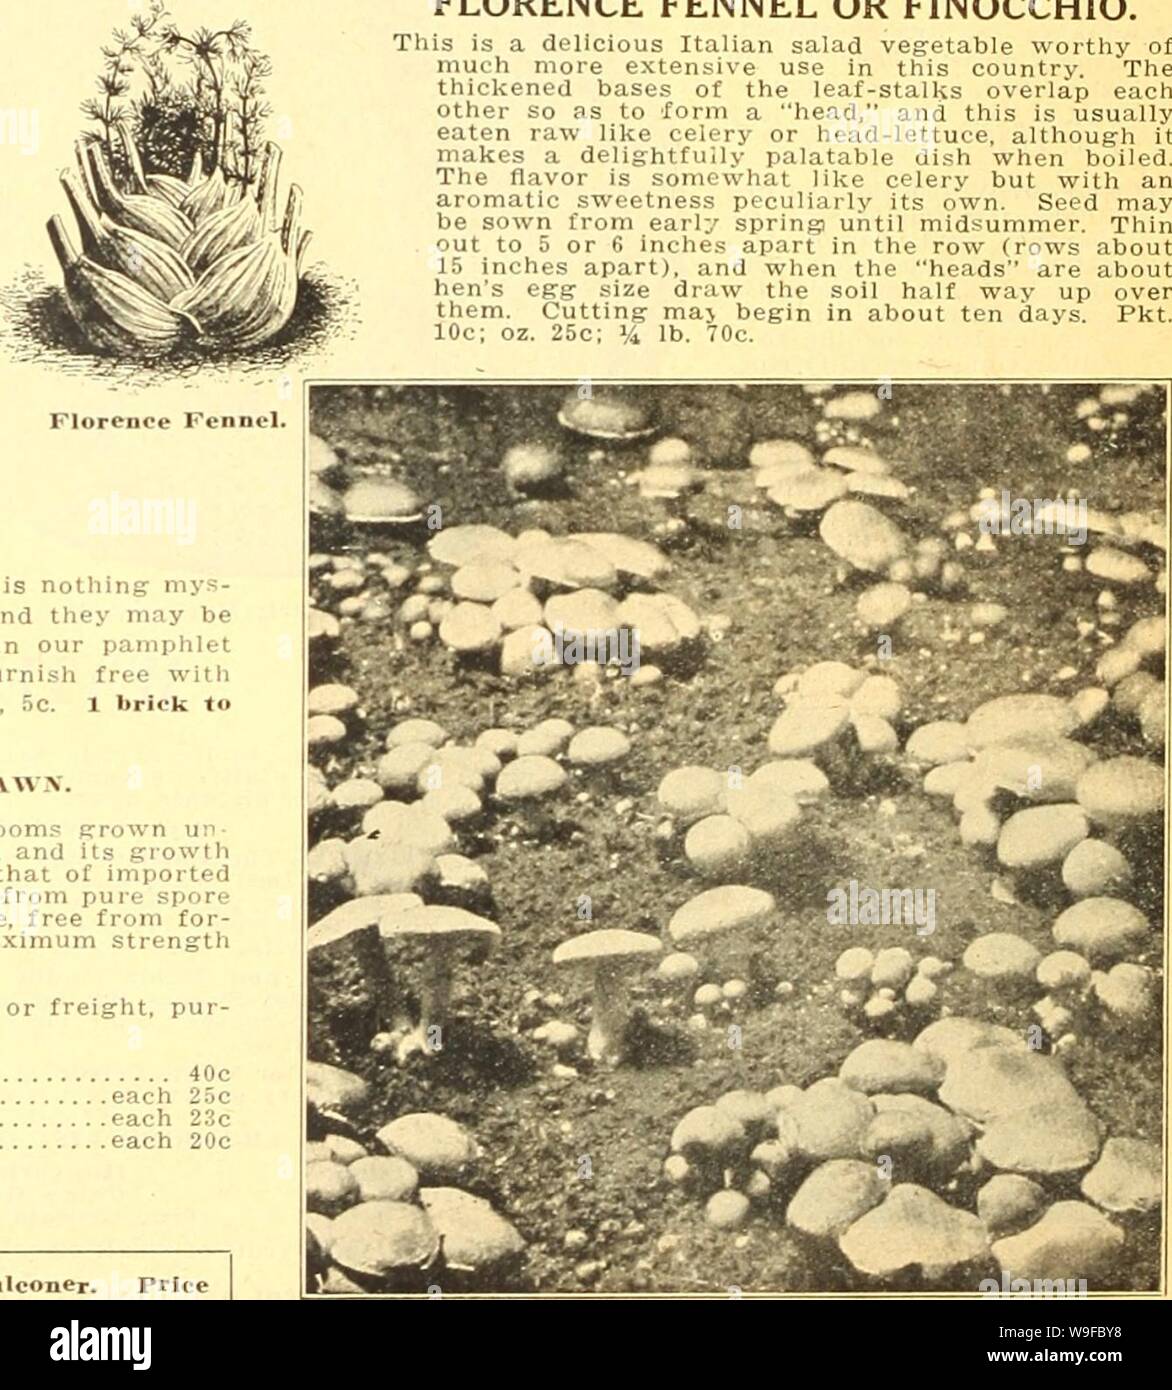 Archive image from page 29 of Currie's farm and garden annual. Currie's farm and garden annual : spring 1923 48th year  curriesfarmgarde19curr 6 Year: 1923 ( Sage. STTCet Marjoram. Summer Savory. Thynie. HERBS 10 10 10 — S«-eef, Pkt. Anise (Pimpinella Anisum)—Culti- vated principally for garnishing-. Balm (Melissa officinalis)—Used for making Balm tea, or wine Basil, Sweet (Ocymum basillicum) Used for soups, stews and sauces Borage (BorasTO officinalis)—Excel- lent for bees 10 Caraway (Carum carui)—The Seed is used in confectionery and medicine. Oz. 20c 5 Catnip (Nepeta cataria) 10 Dill (Aneth Stock Photo